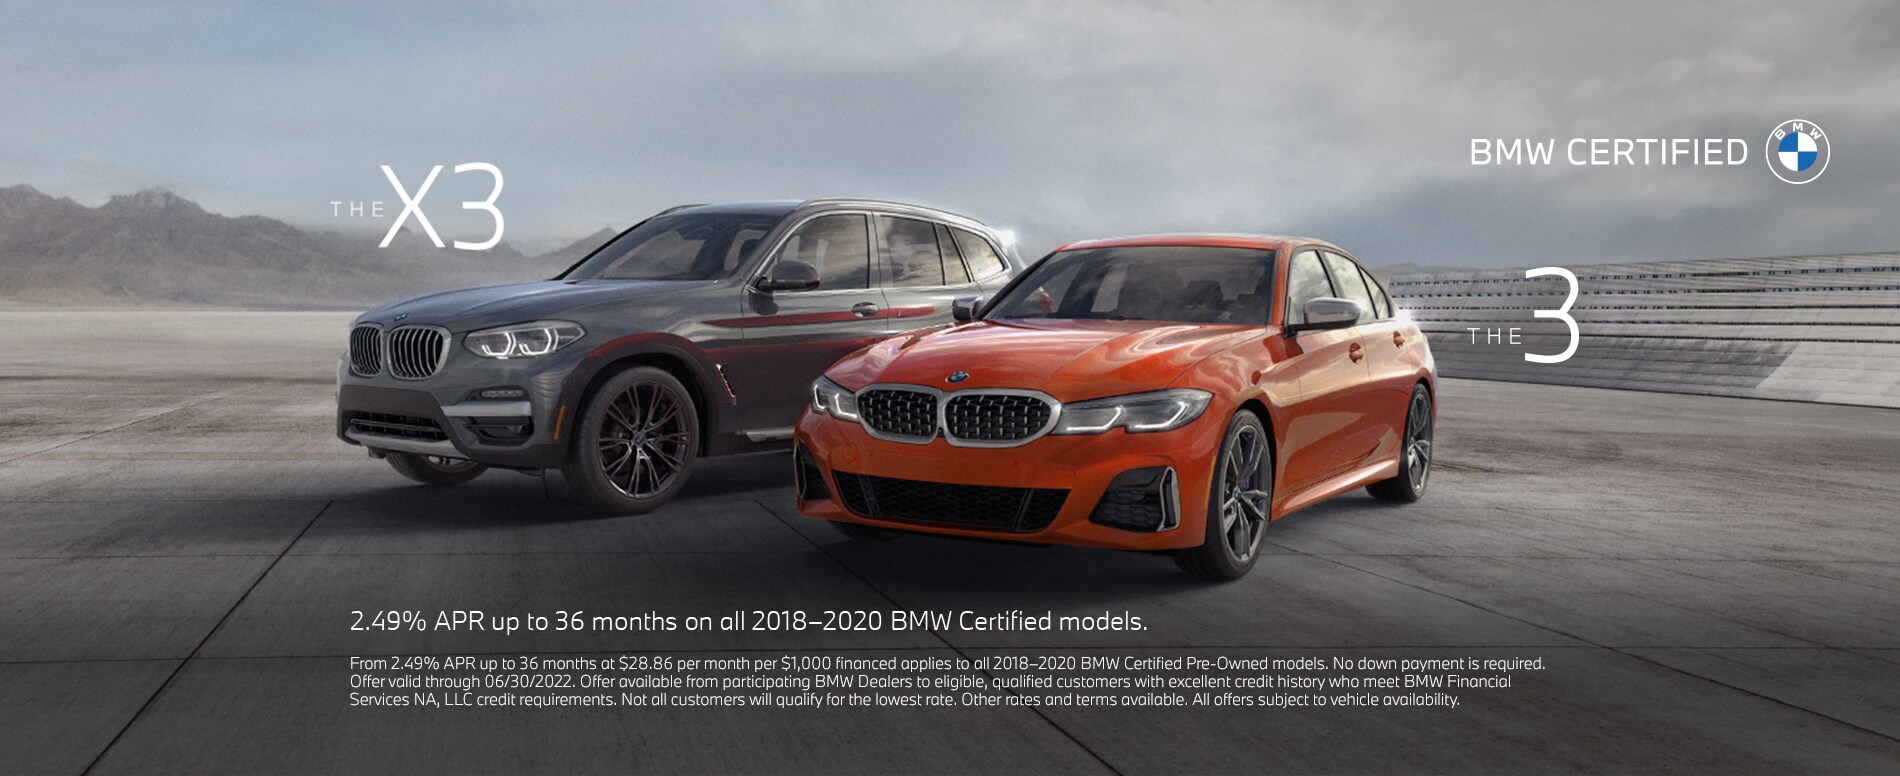 BMW Certified Offers Banner